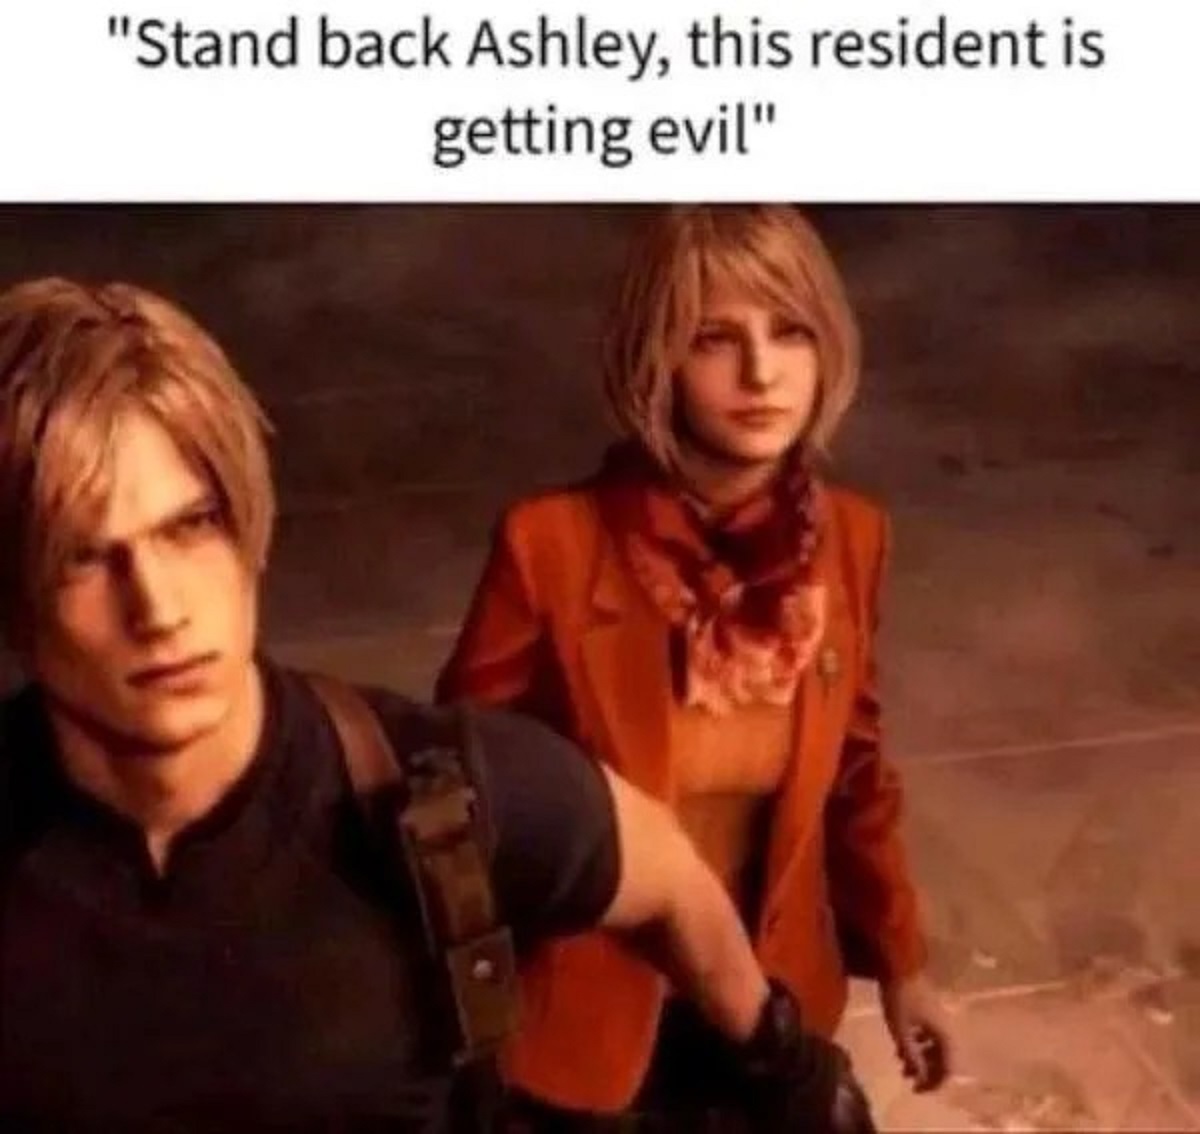 stand back ashley this resident is getting evil - "Stand back Ashley, this resident is getting evil"